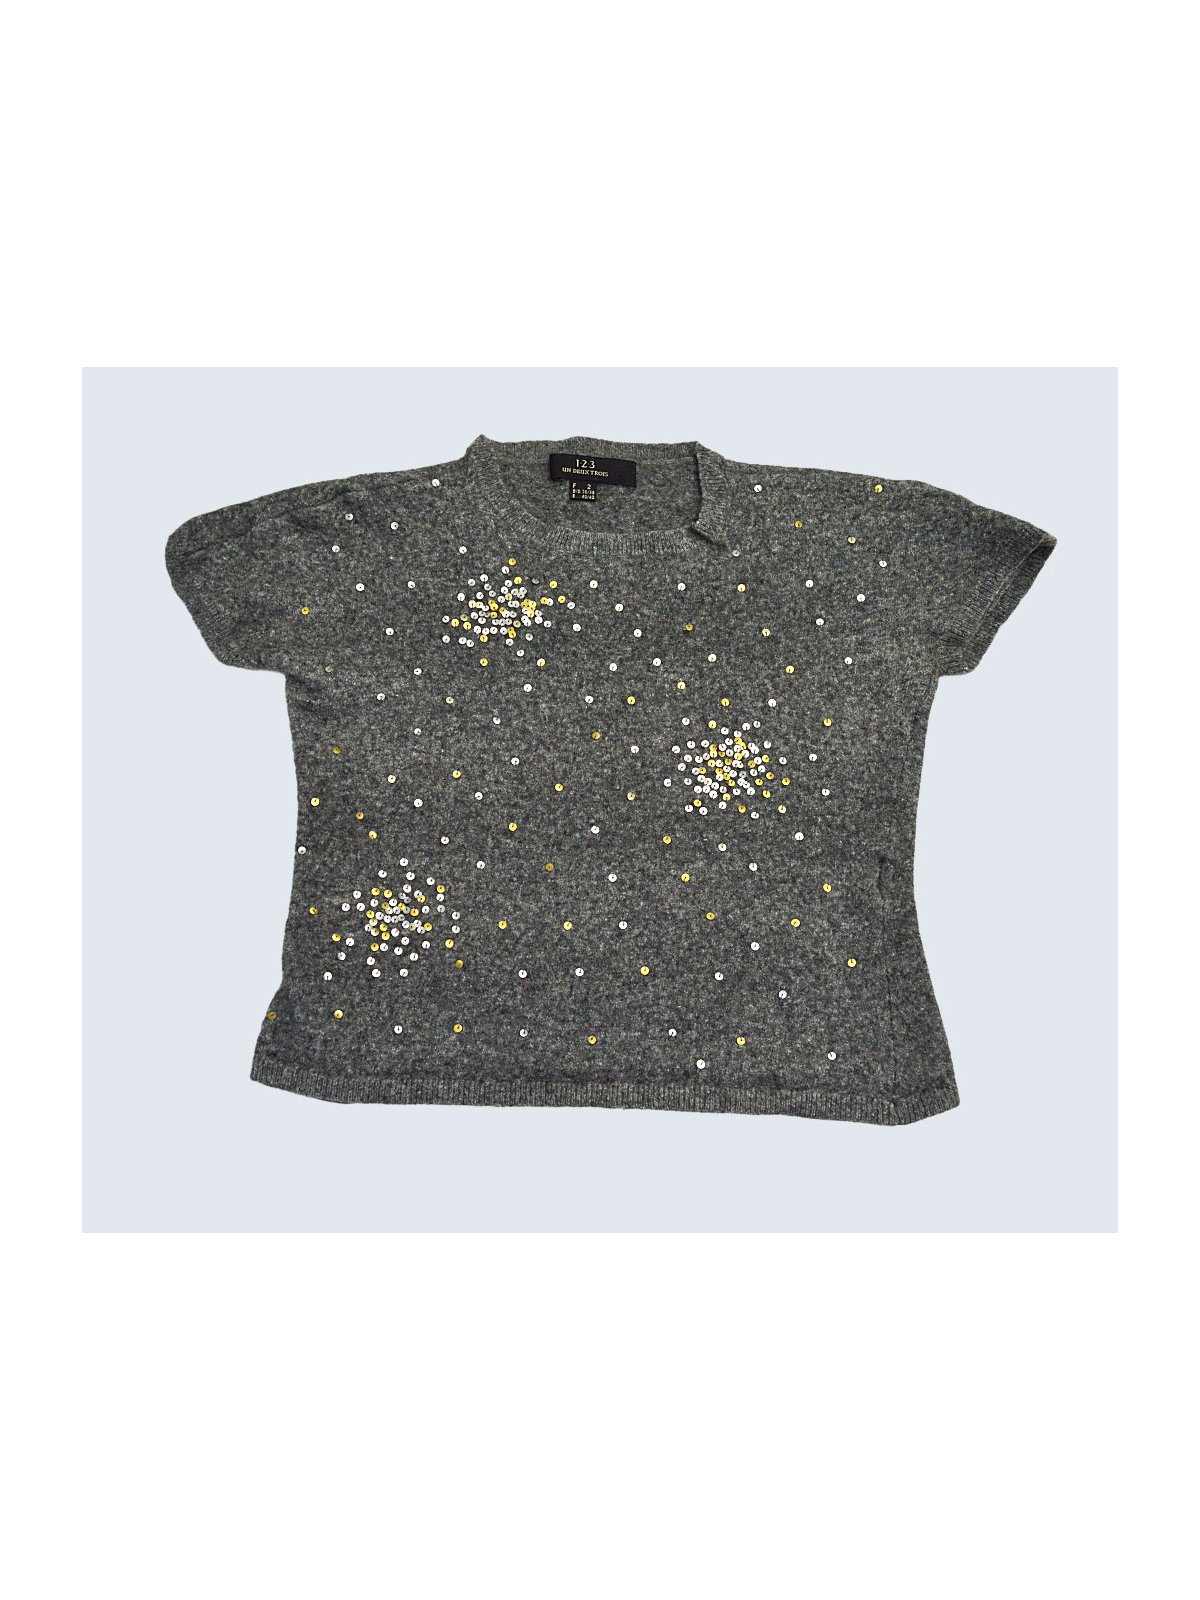 Pull d'occasion  T.34 pour fille.